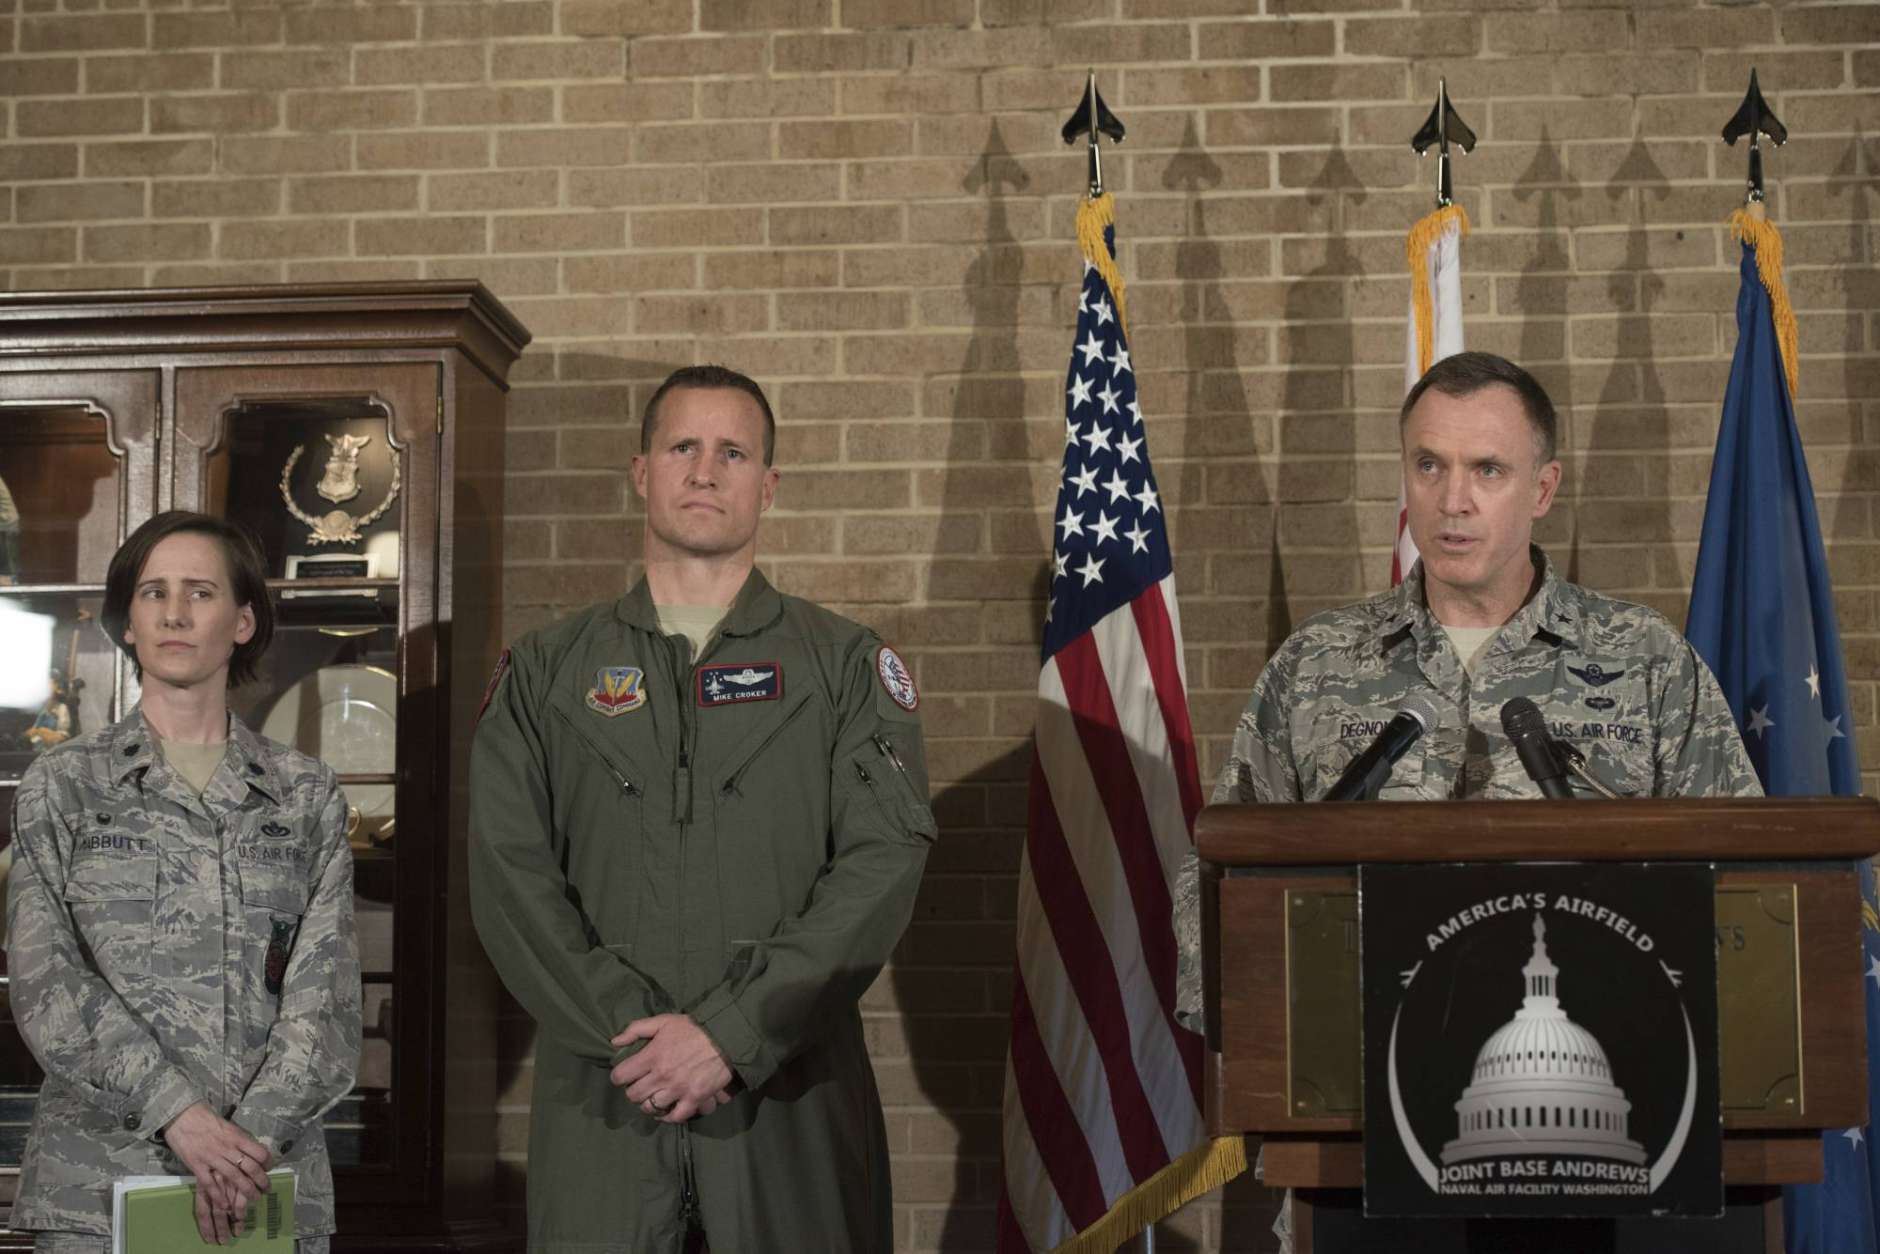 Brigadier Gen. George Degnon, the acting adjutant general of the D.C. Air National Guard, left, accompanied by Lt. Colonel Lisa Mabbutt, left, and Lt. Colonel Michael Croker, speaks during a news conference at Andrews Air Force Base, Md., Wednesday, April 5, 2017, about the military aircraft crash in Clinton, Md. A fighter pilot on a training mission ejected safely before the jet crashed in a wooded area in a Washington suburb. Witnesses reported the sound of live ammunition. (AP Photo/Sait Serkan Gurbuz)